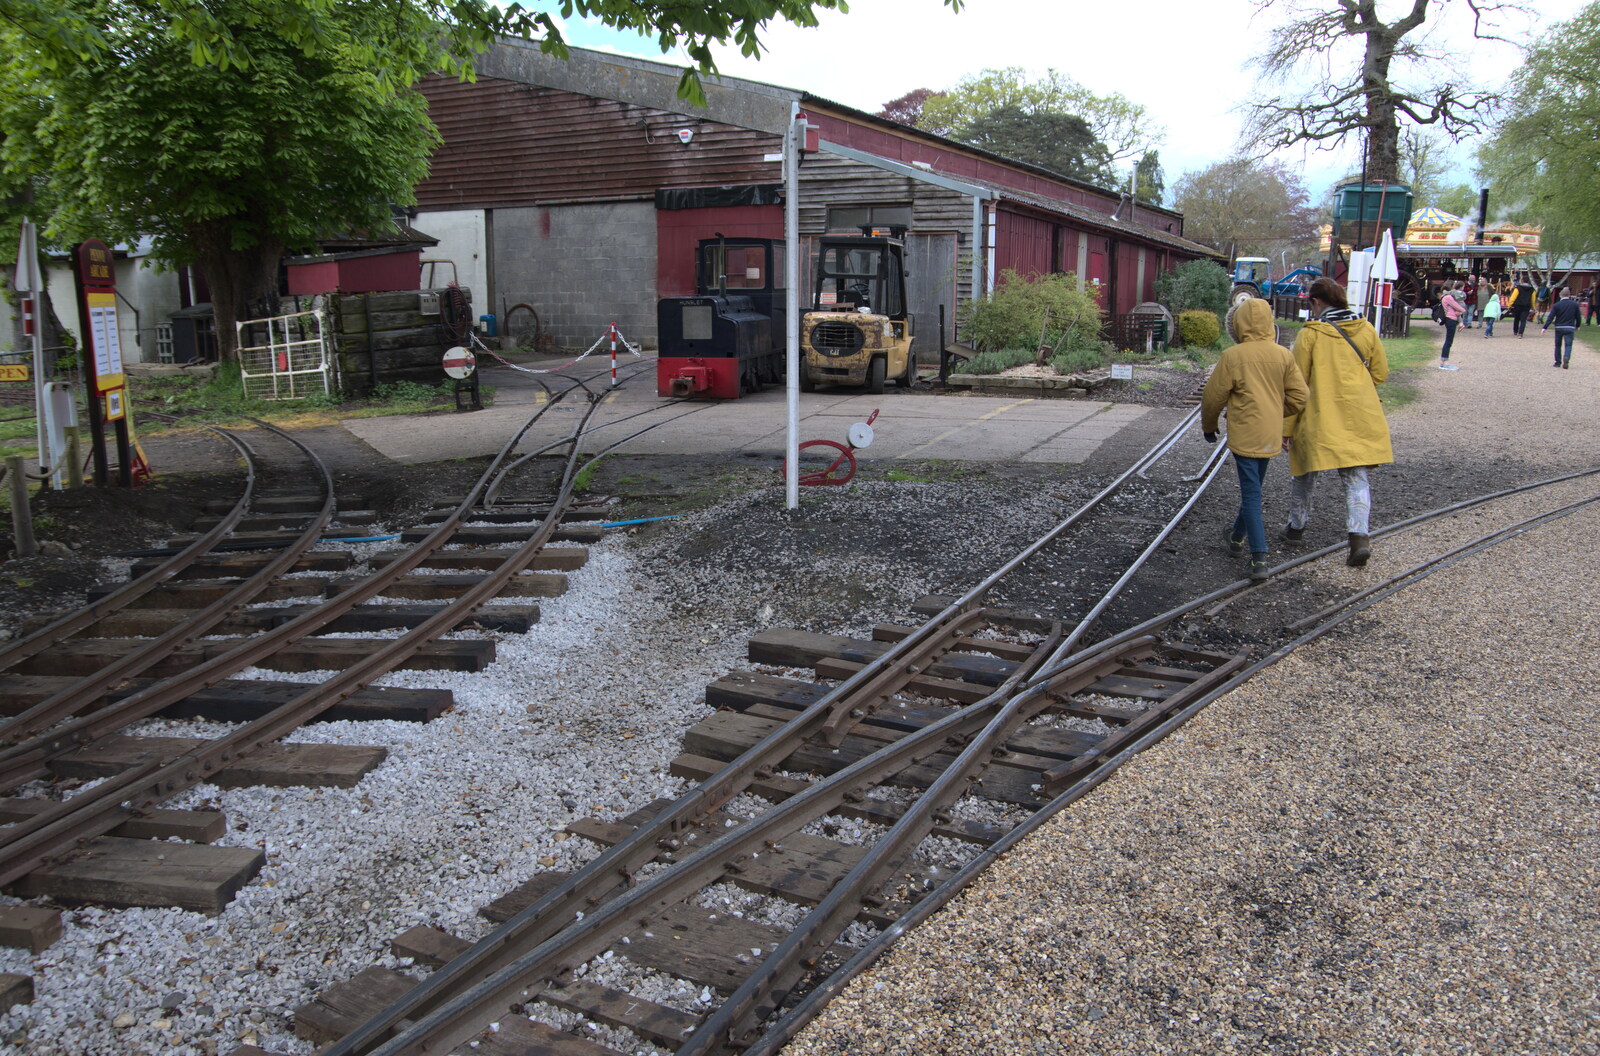 Harry and Isobel cross the tracks from The Heritage Steam Gala, Bressingham Steam Museum, Norfolk - 1st May 2023